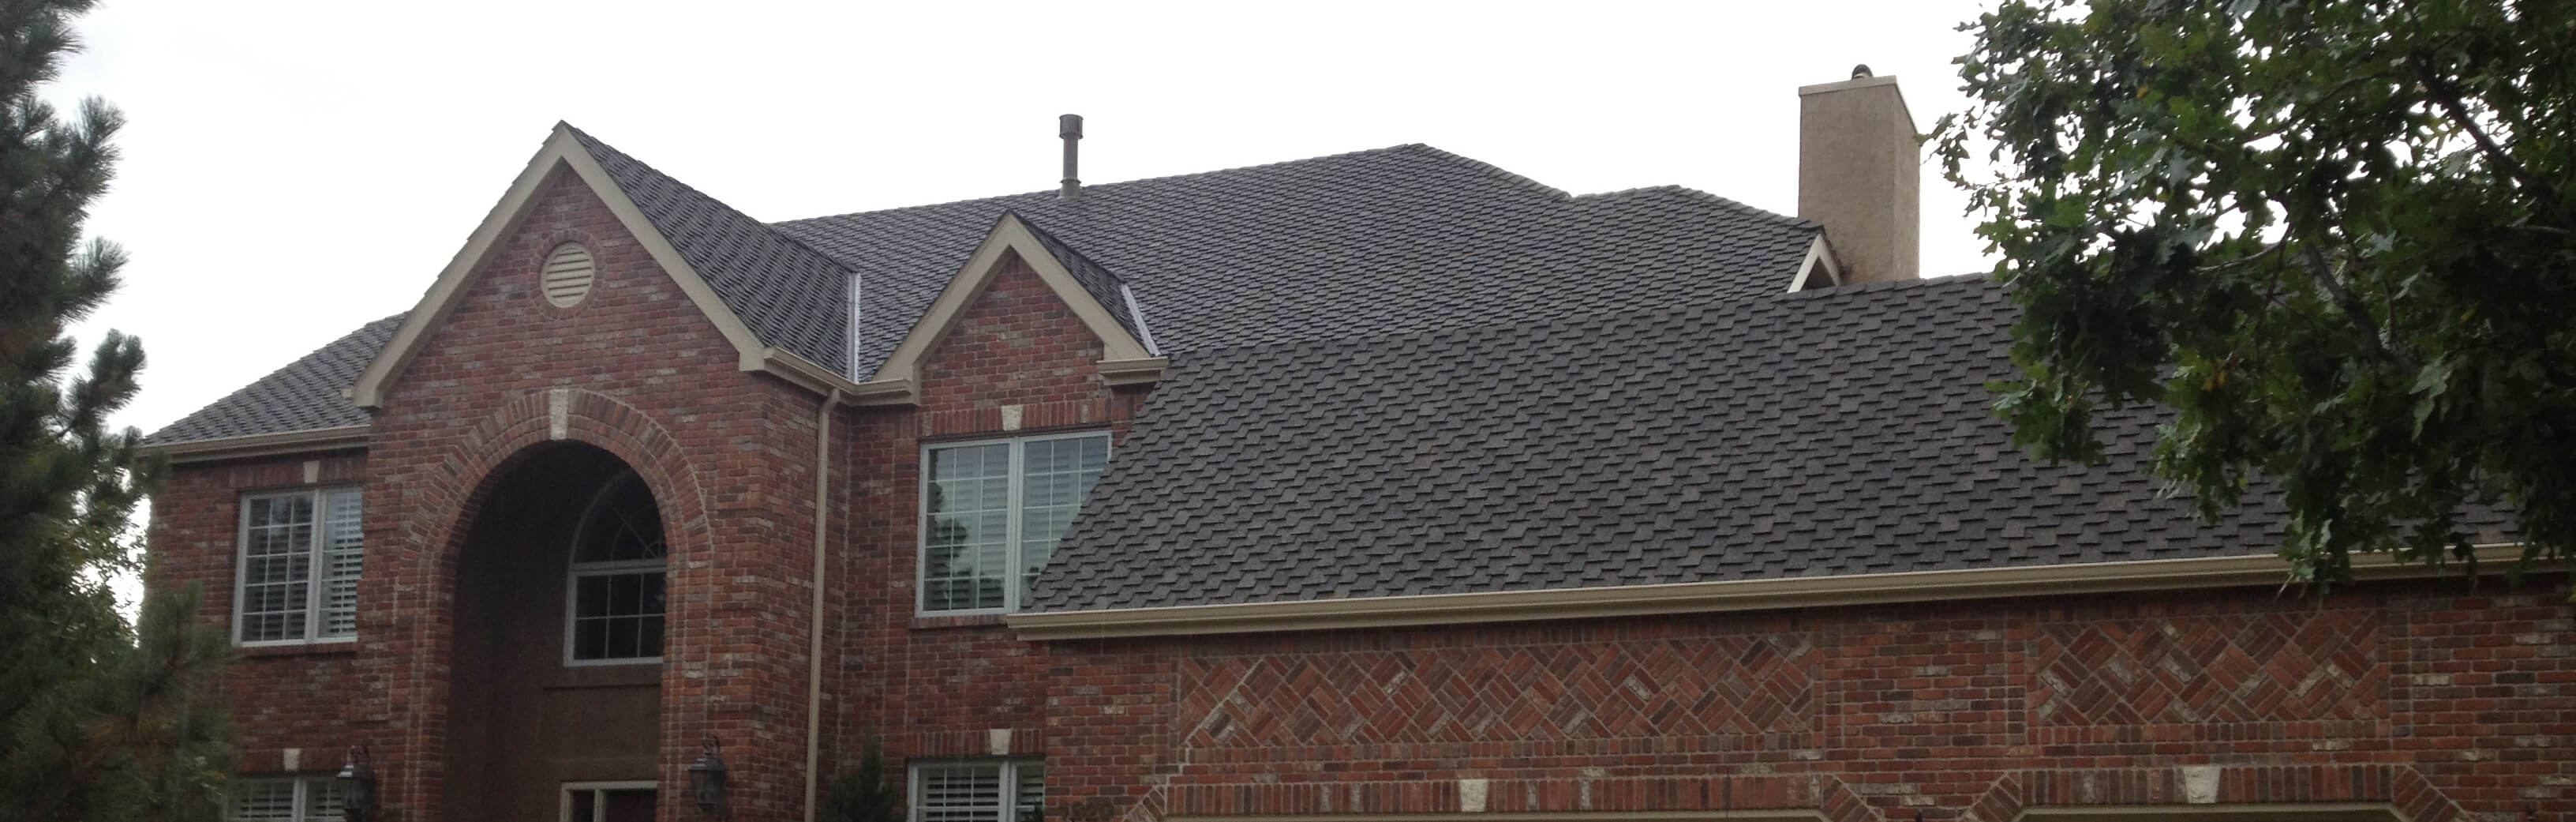 Reputable Roofing Company Colorado Springs Roofing Reviews